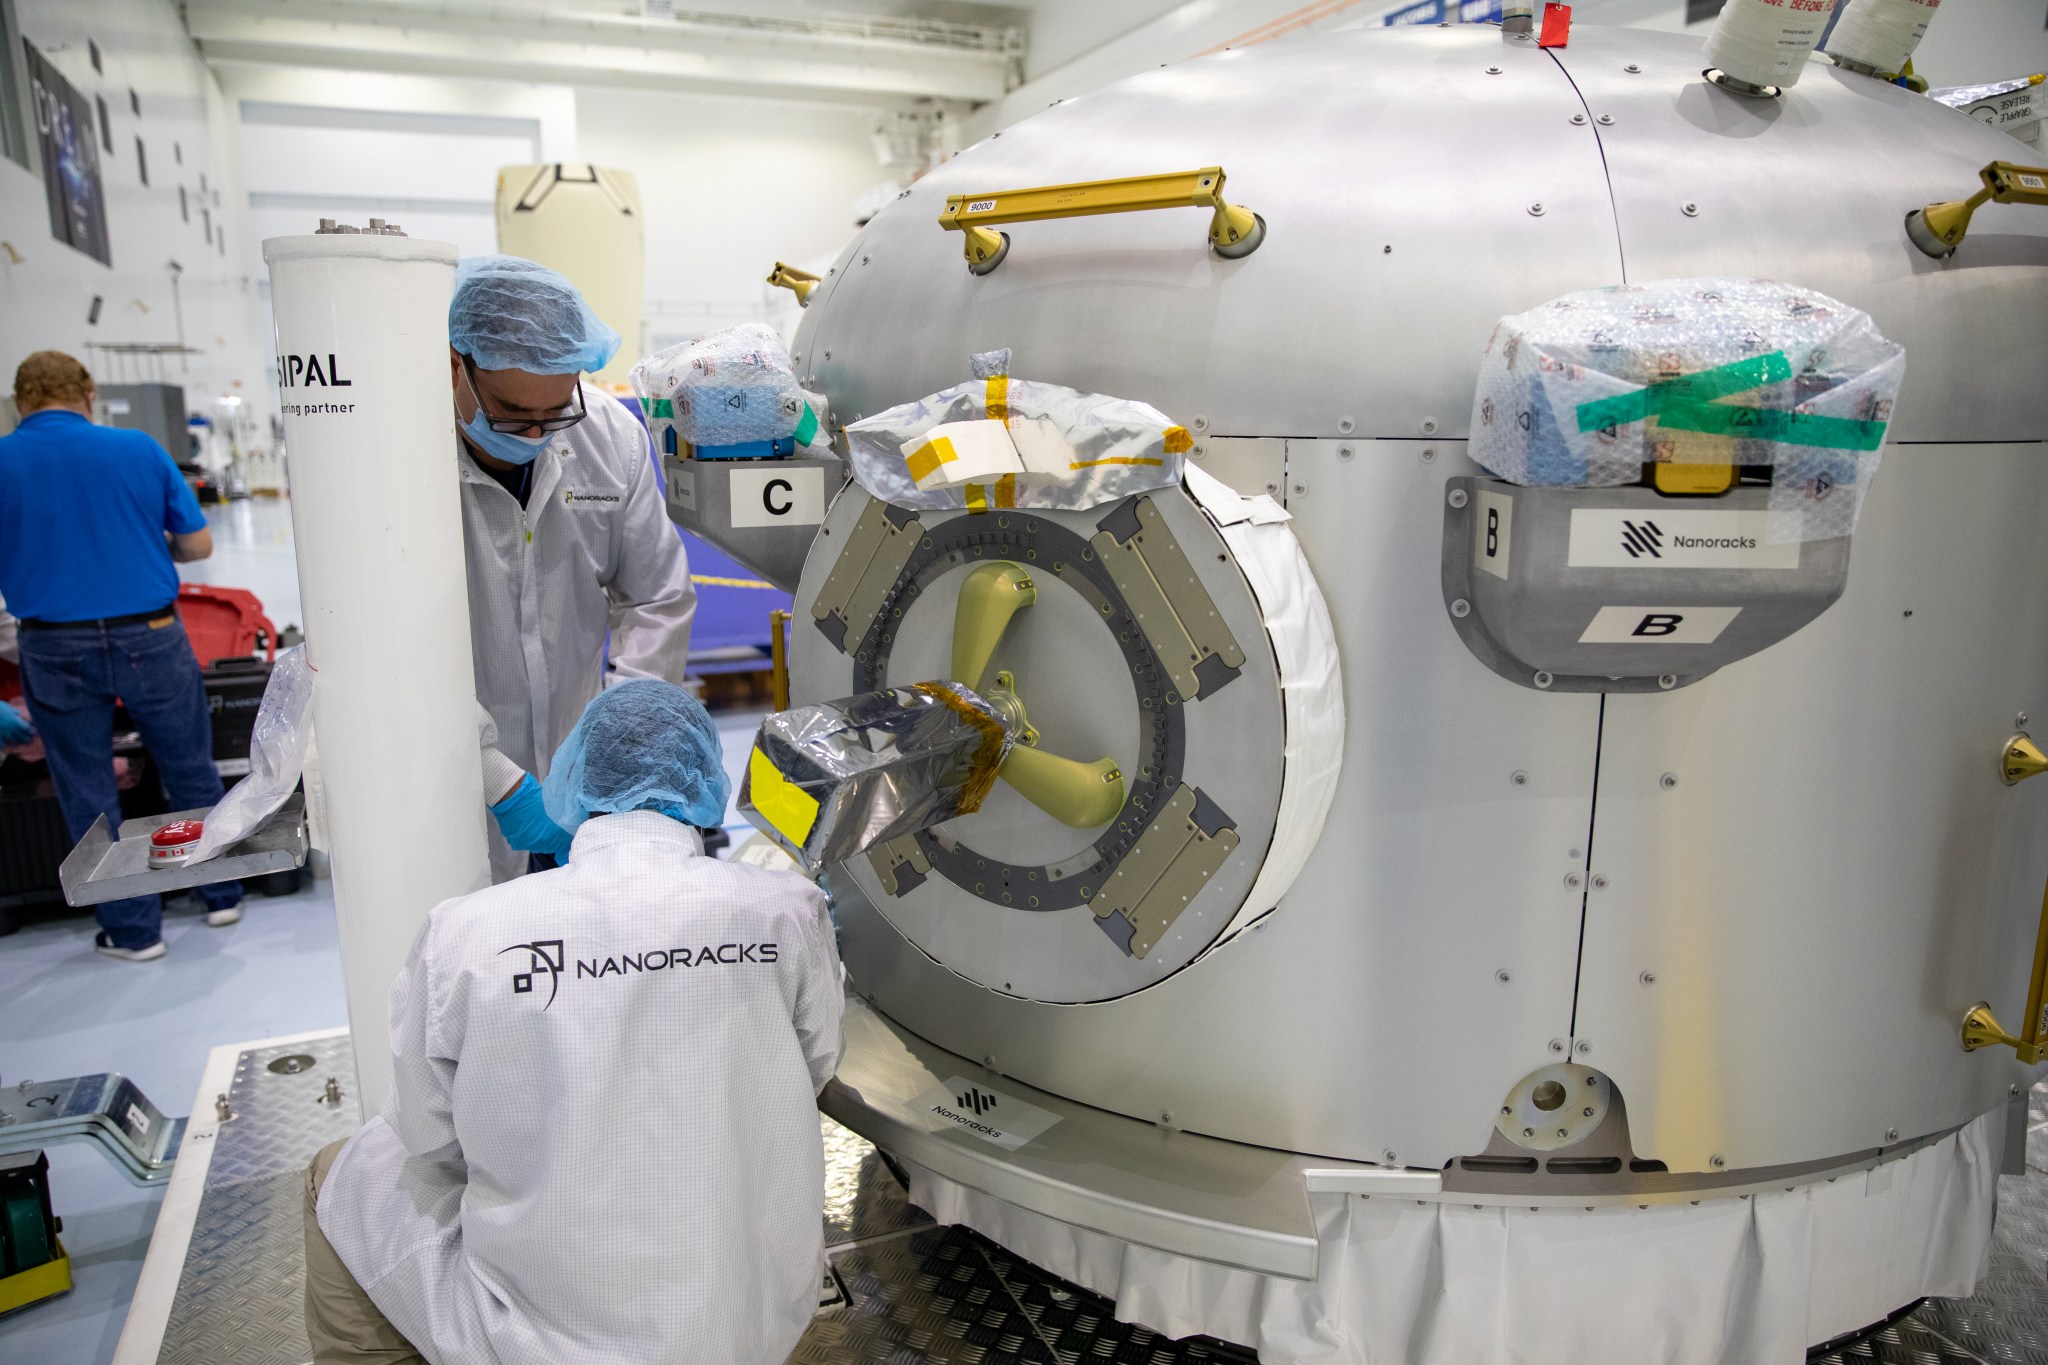 Technicians working on the NanoRacks Airlock inside the Space Station